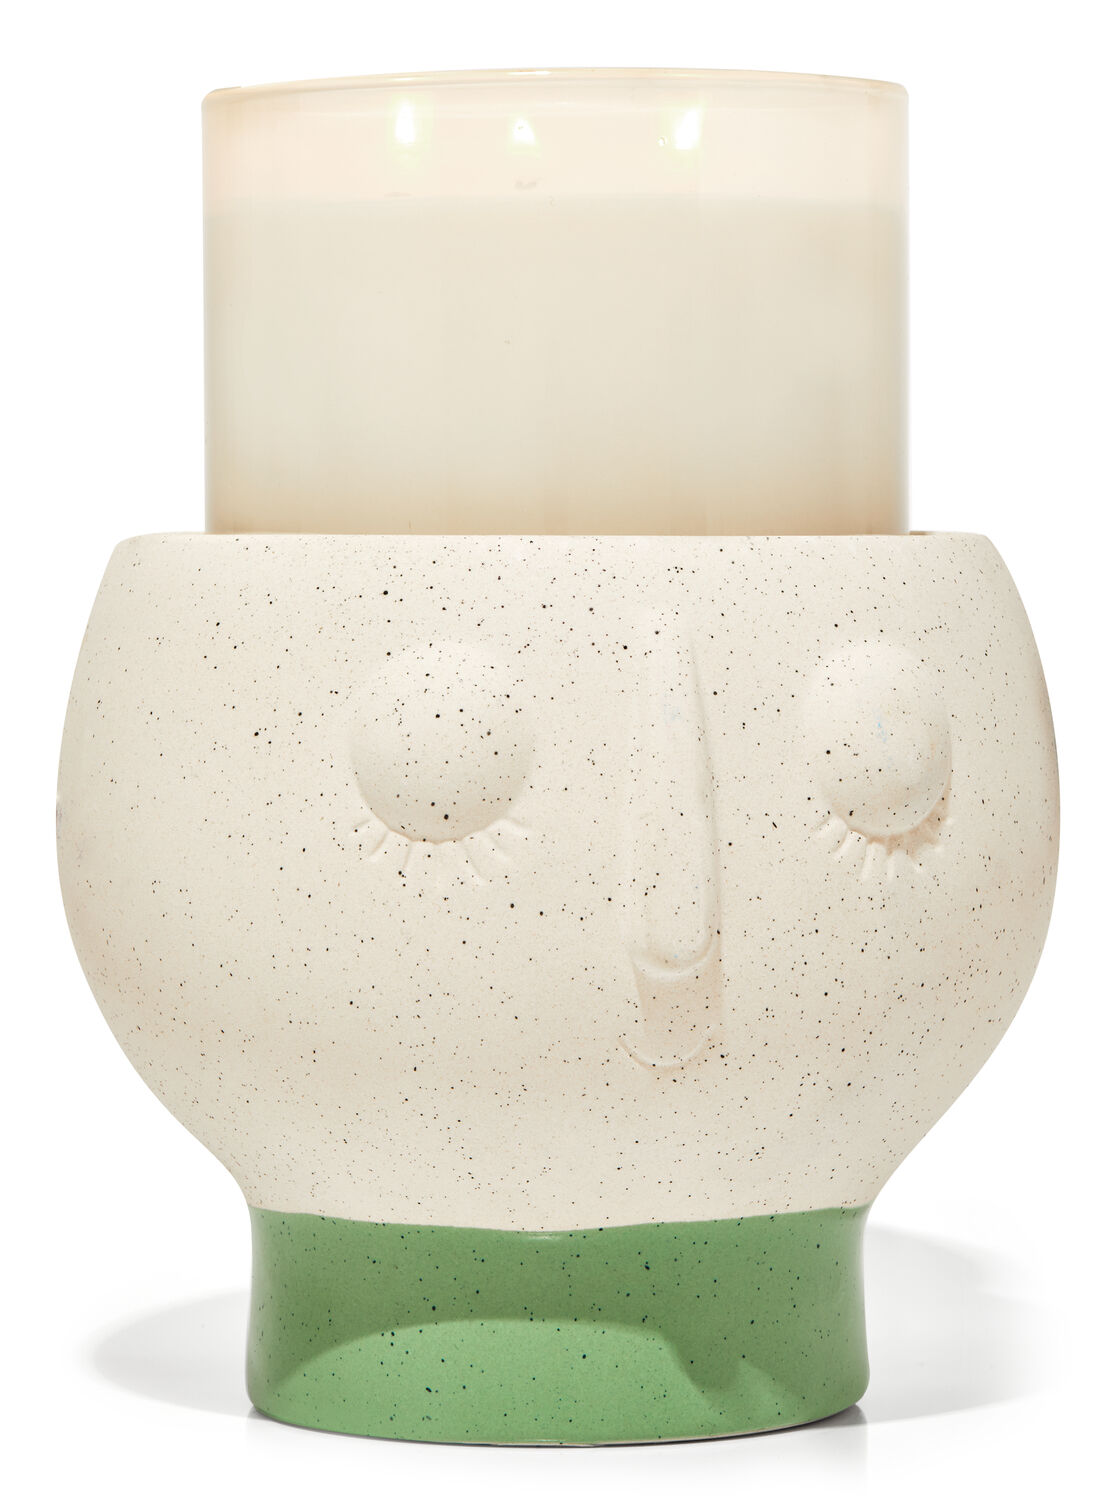 Bath and Body Works 'TIS the SEASON PEDESTAL 3-WICK CANDLE HOLDER CANDLE SLEEVE 